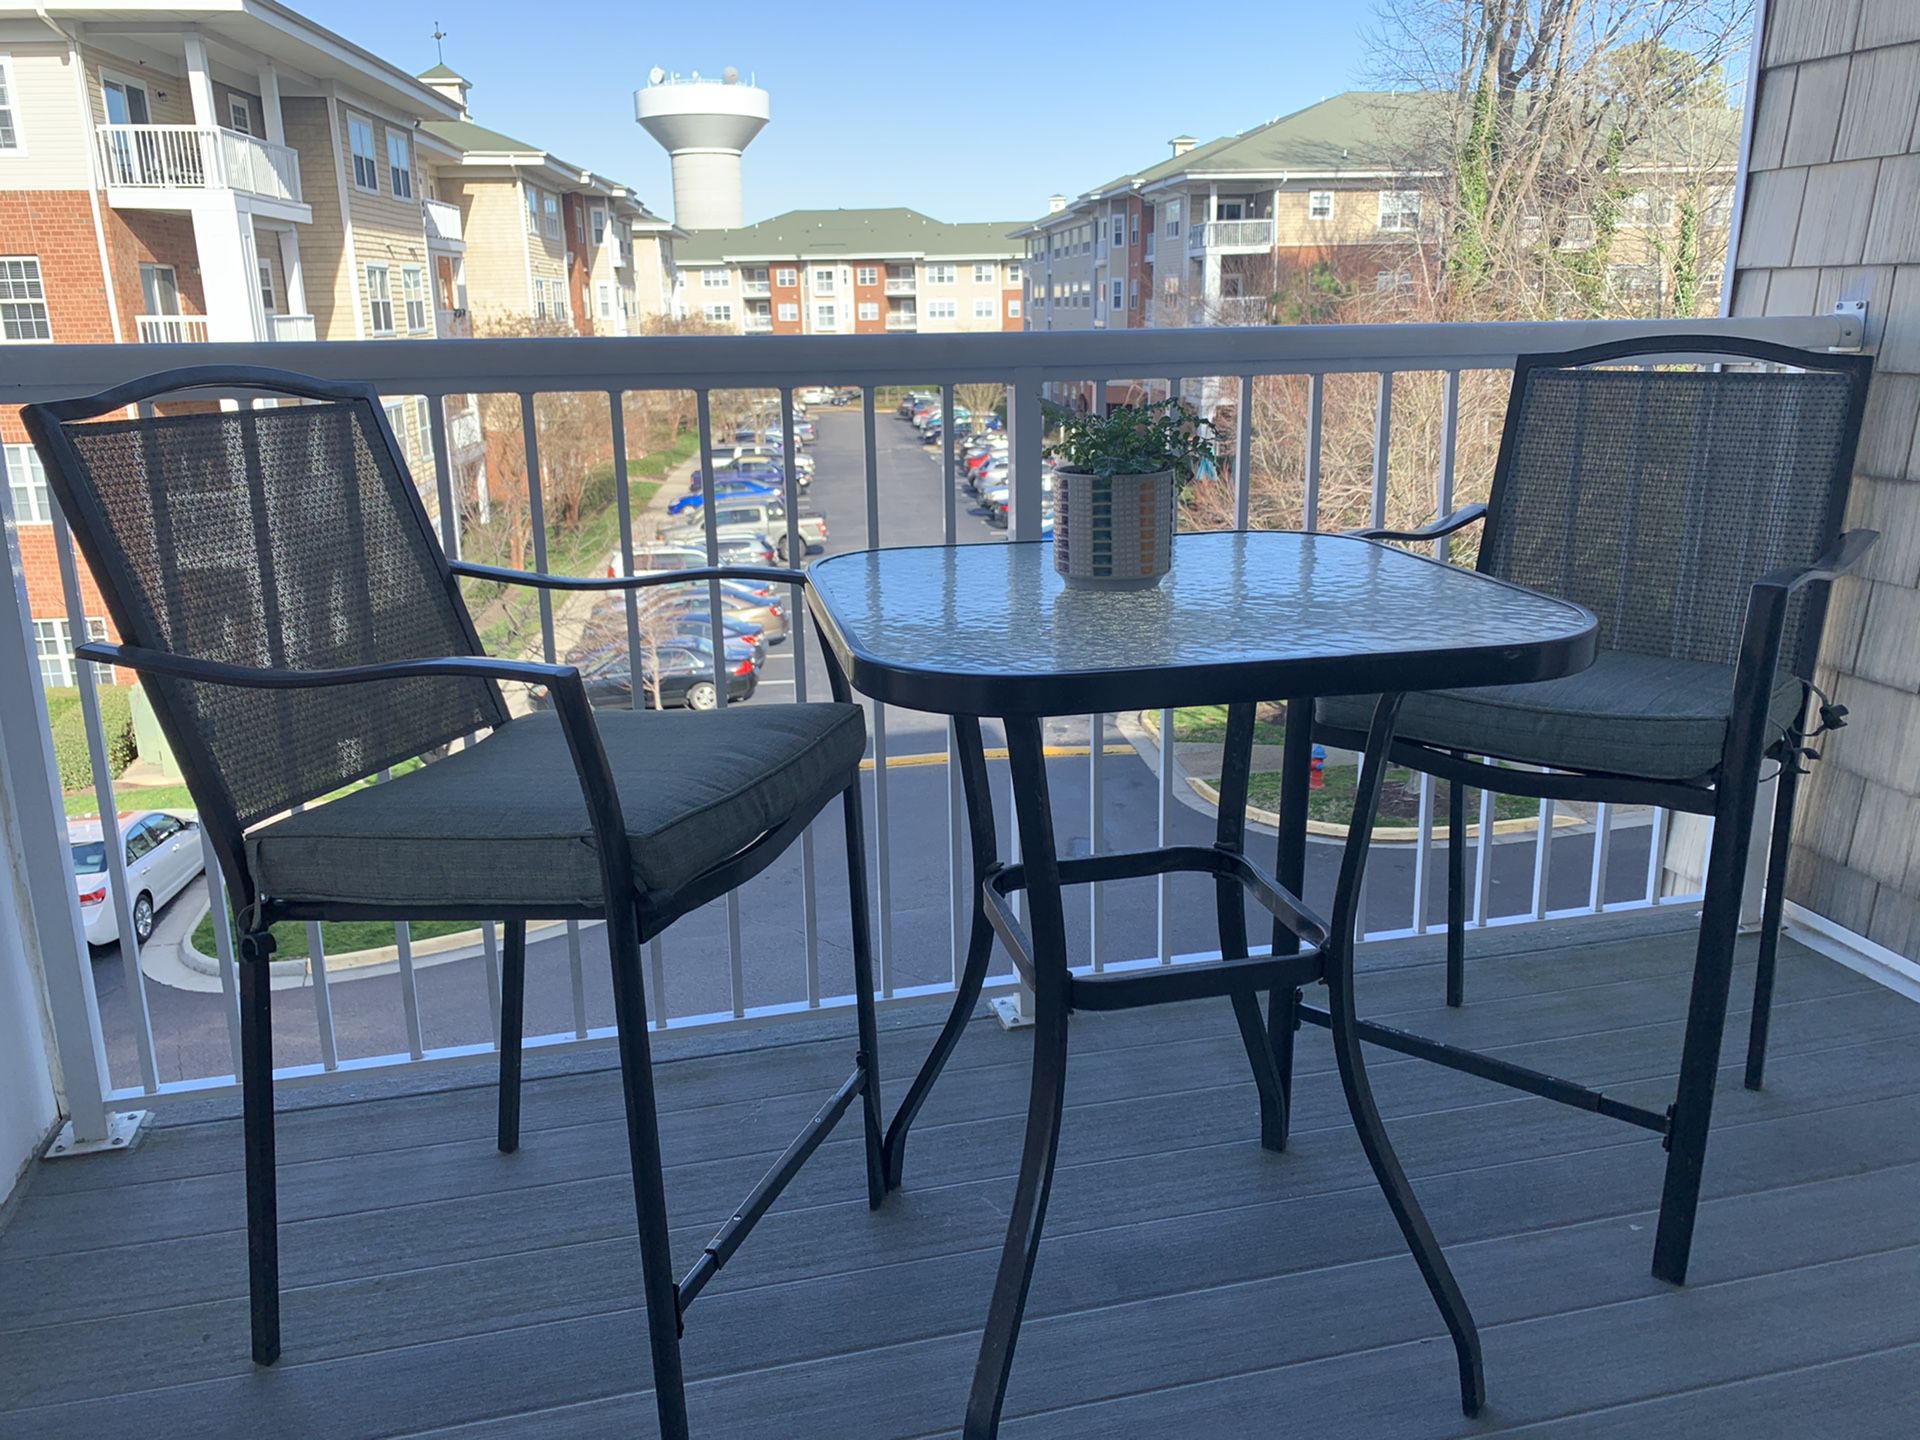 Small outdoor deck patio furniture.